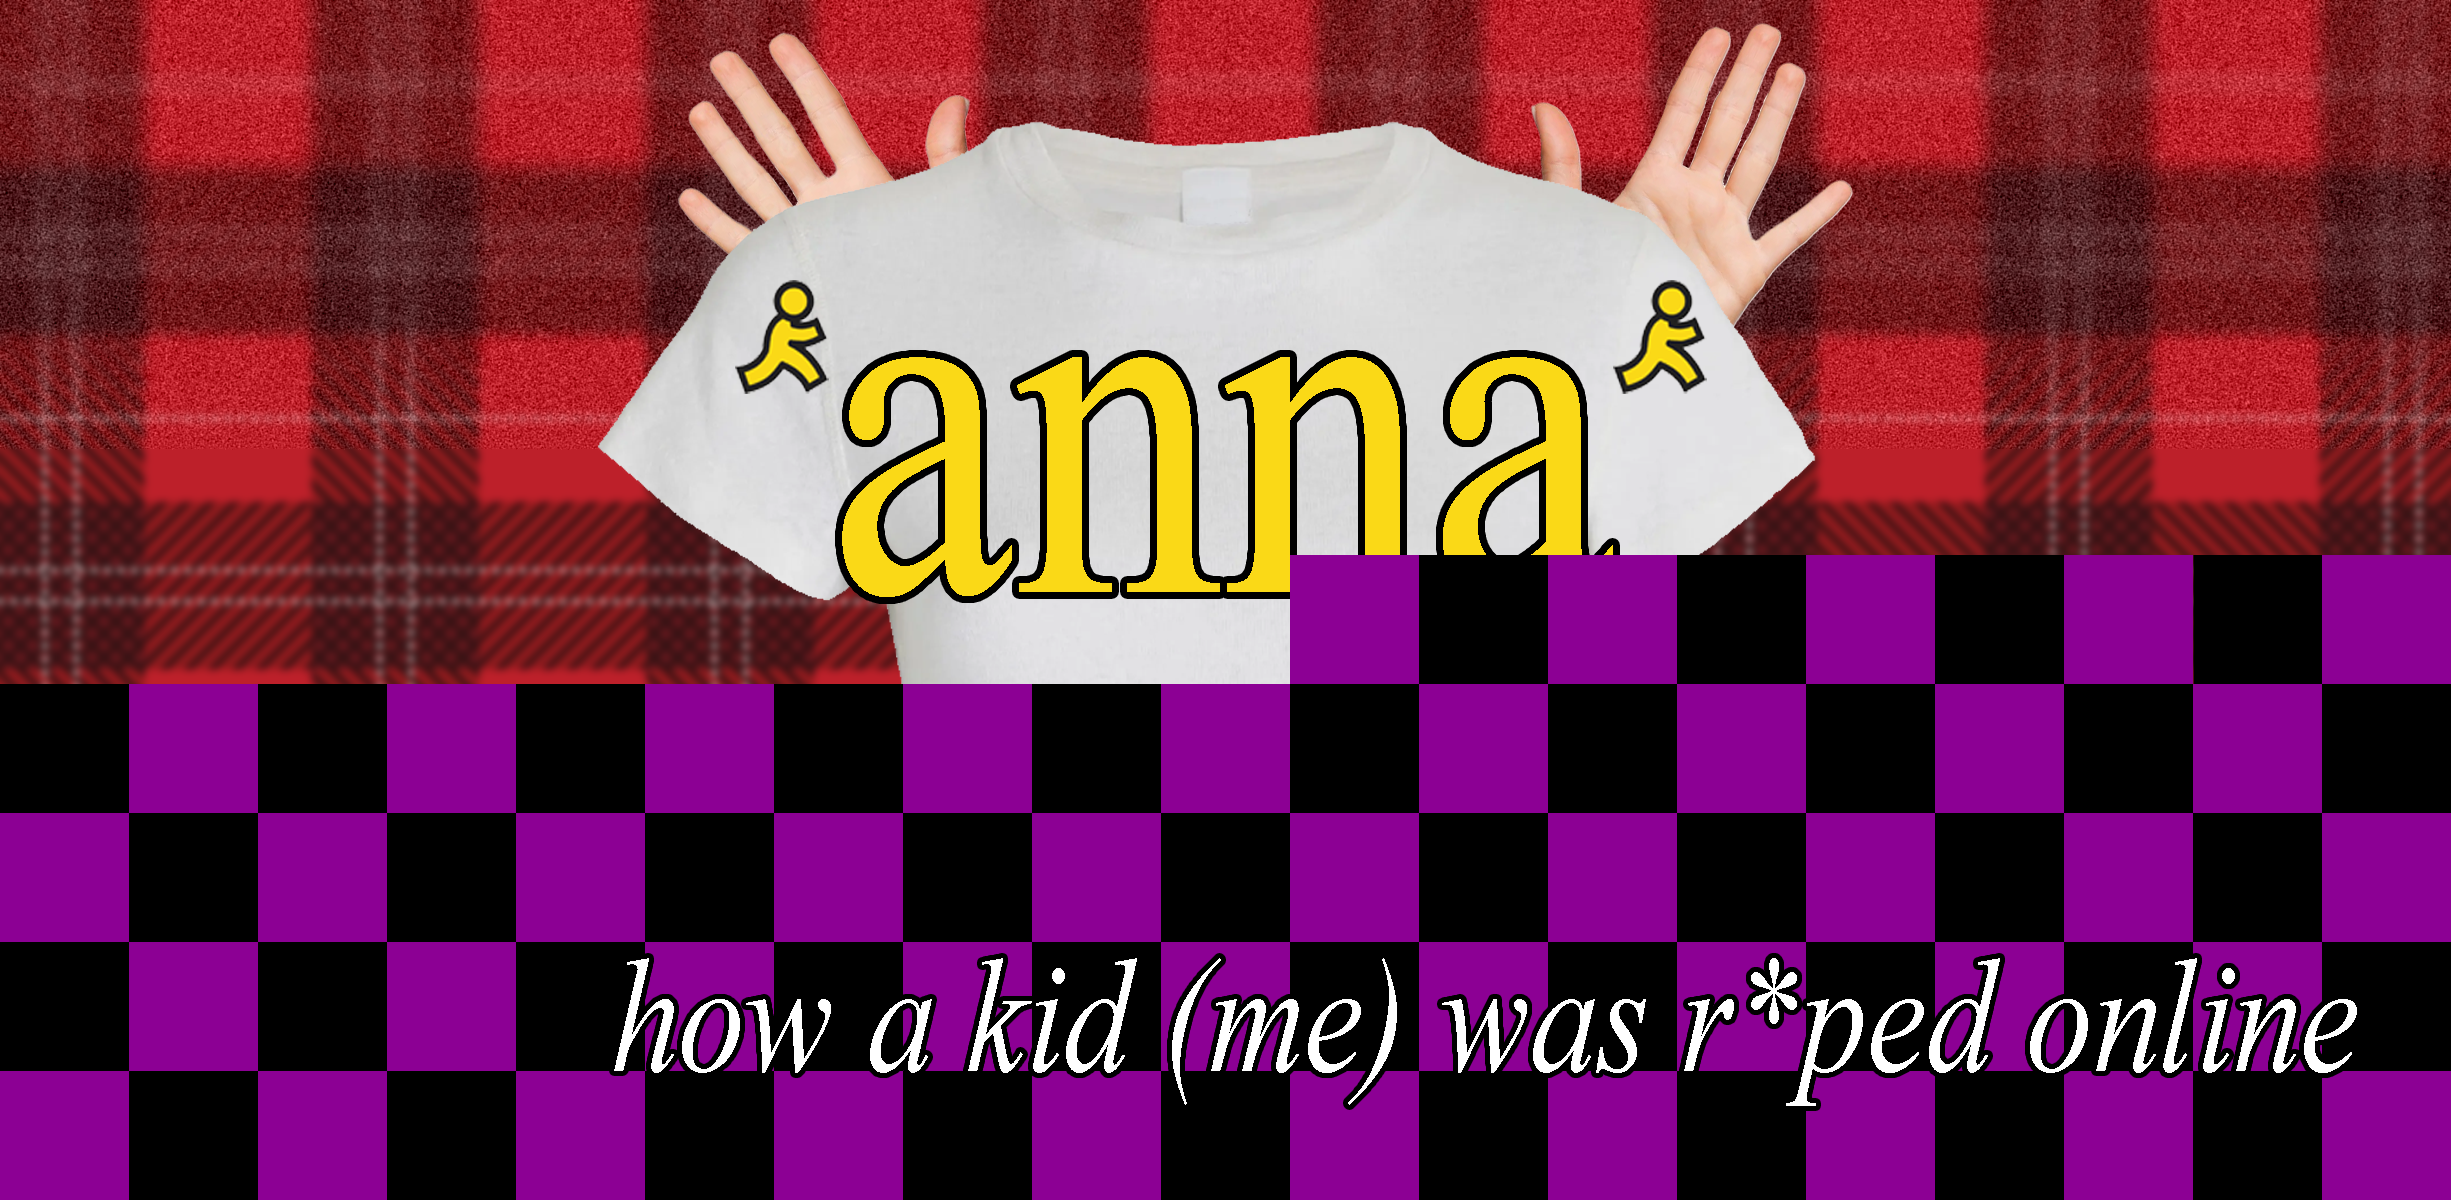 ‘anna’: how a kid (me) was raped online